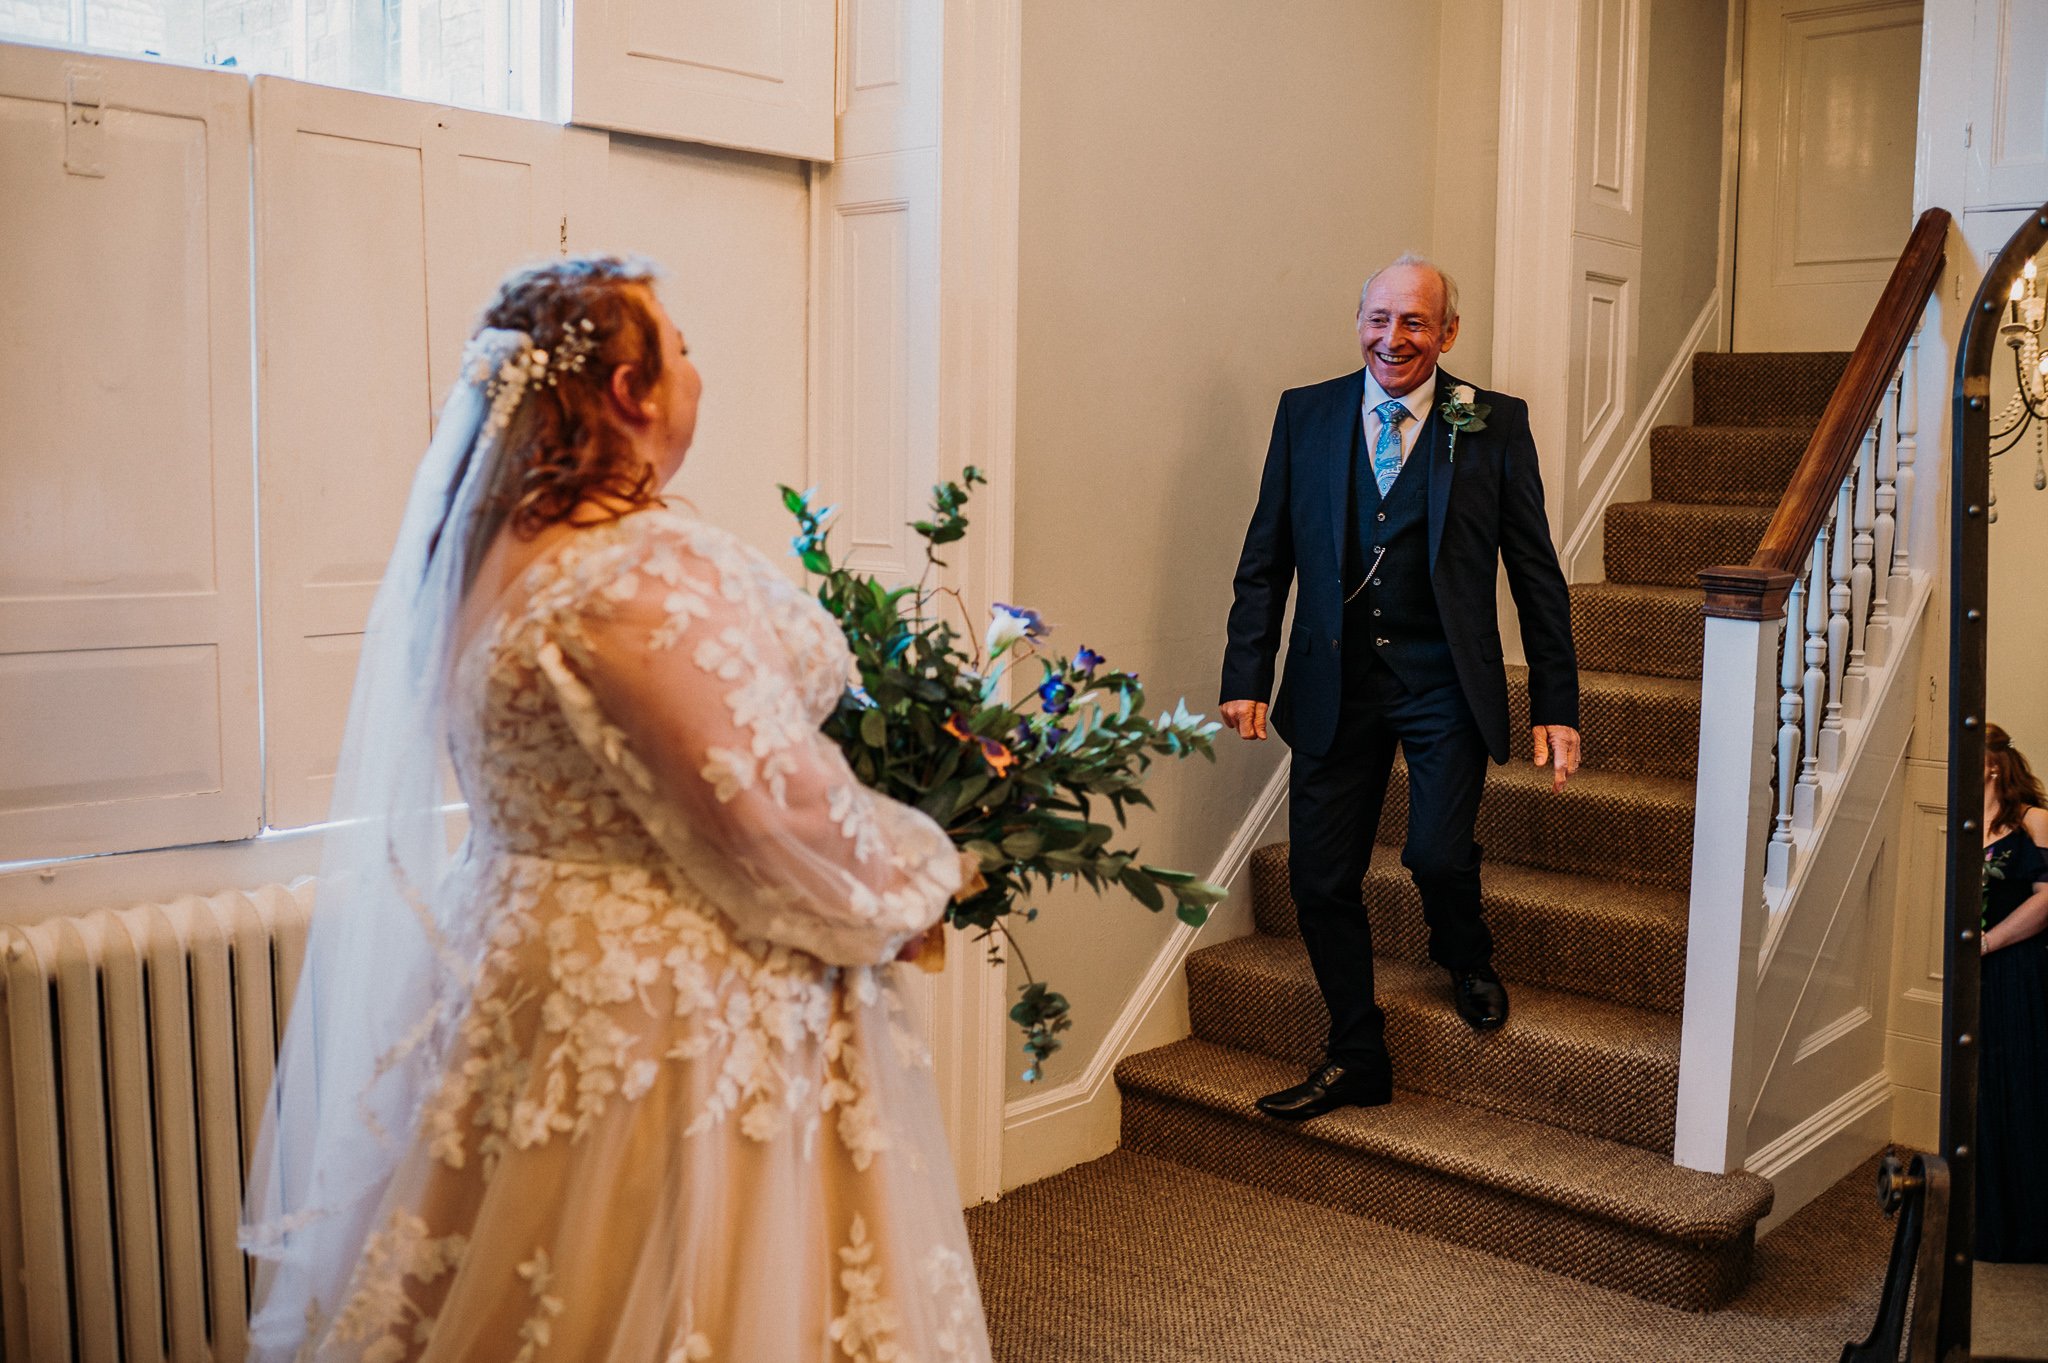 The father of the bride comes down the steps to greet his daughter in her wedding dress at Sneaton Castle, Whitby.